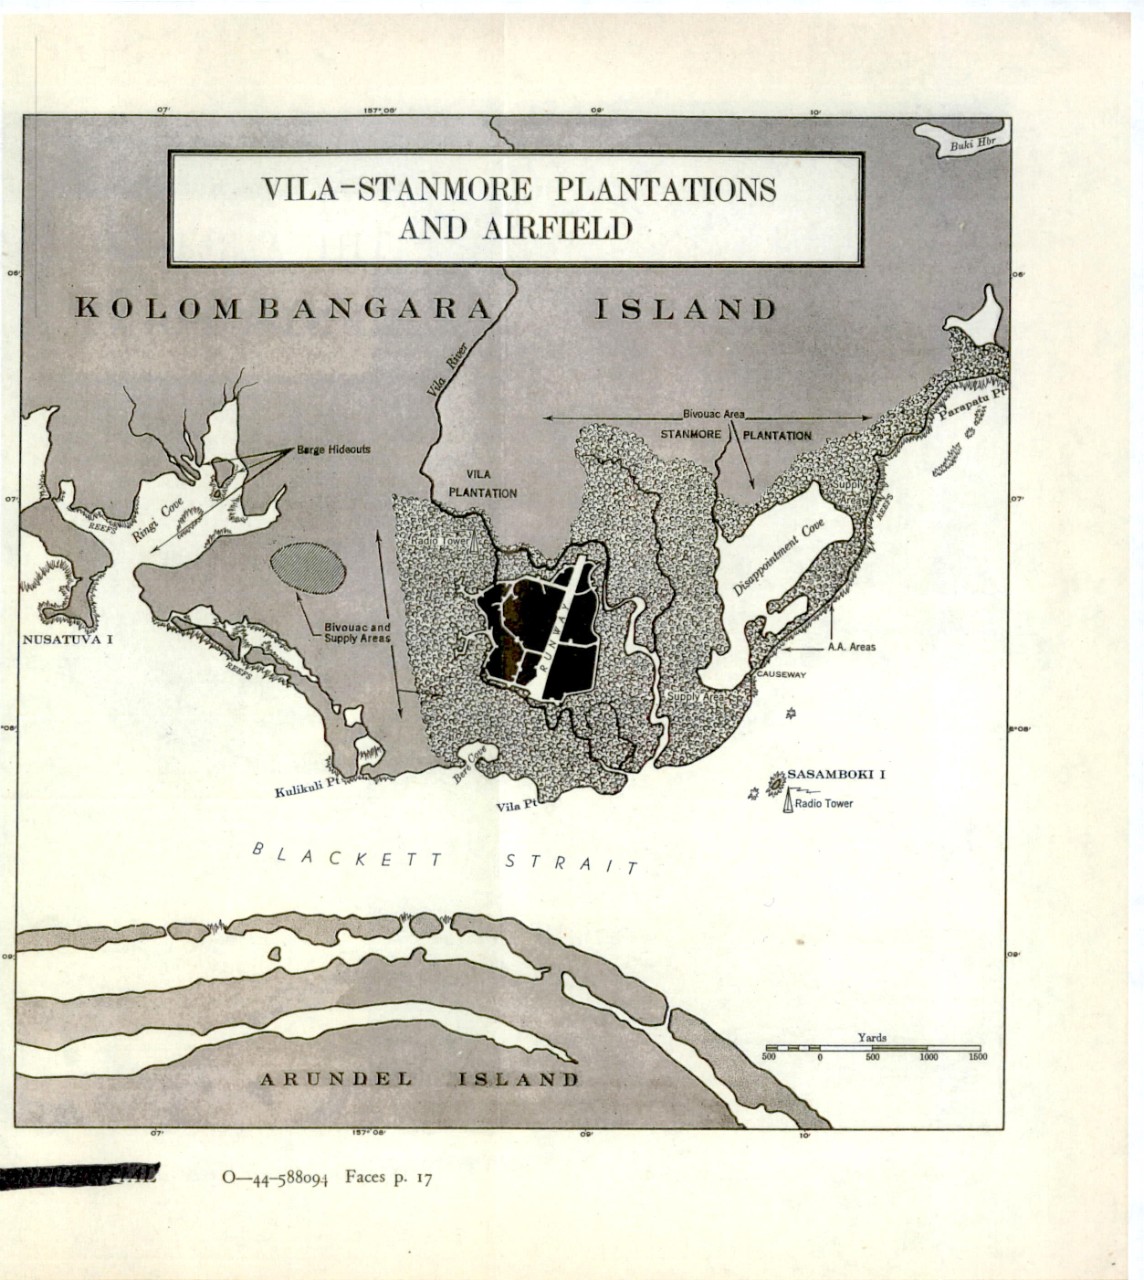 <p>Vila-Stanmore Plantations and airfield&nbsp;</p>
